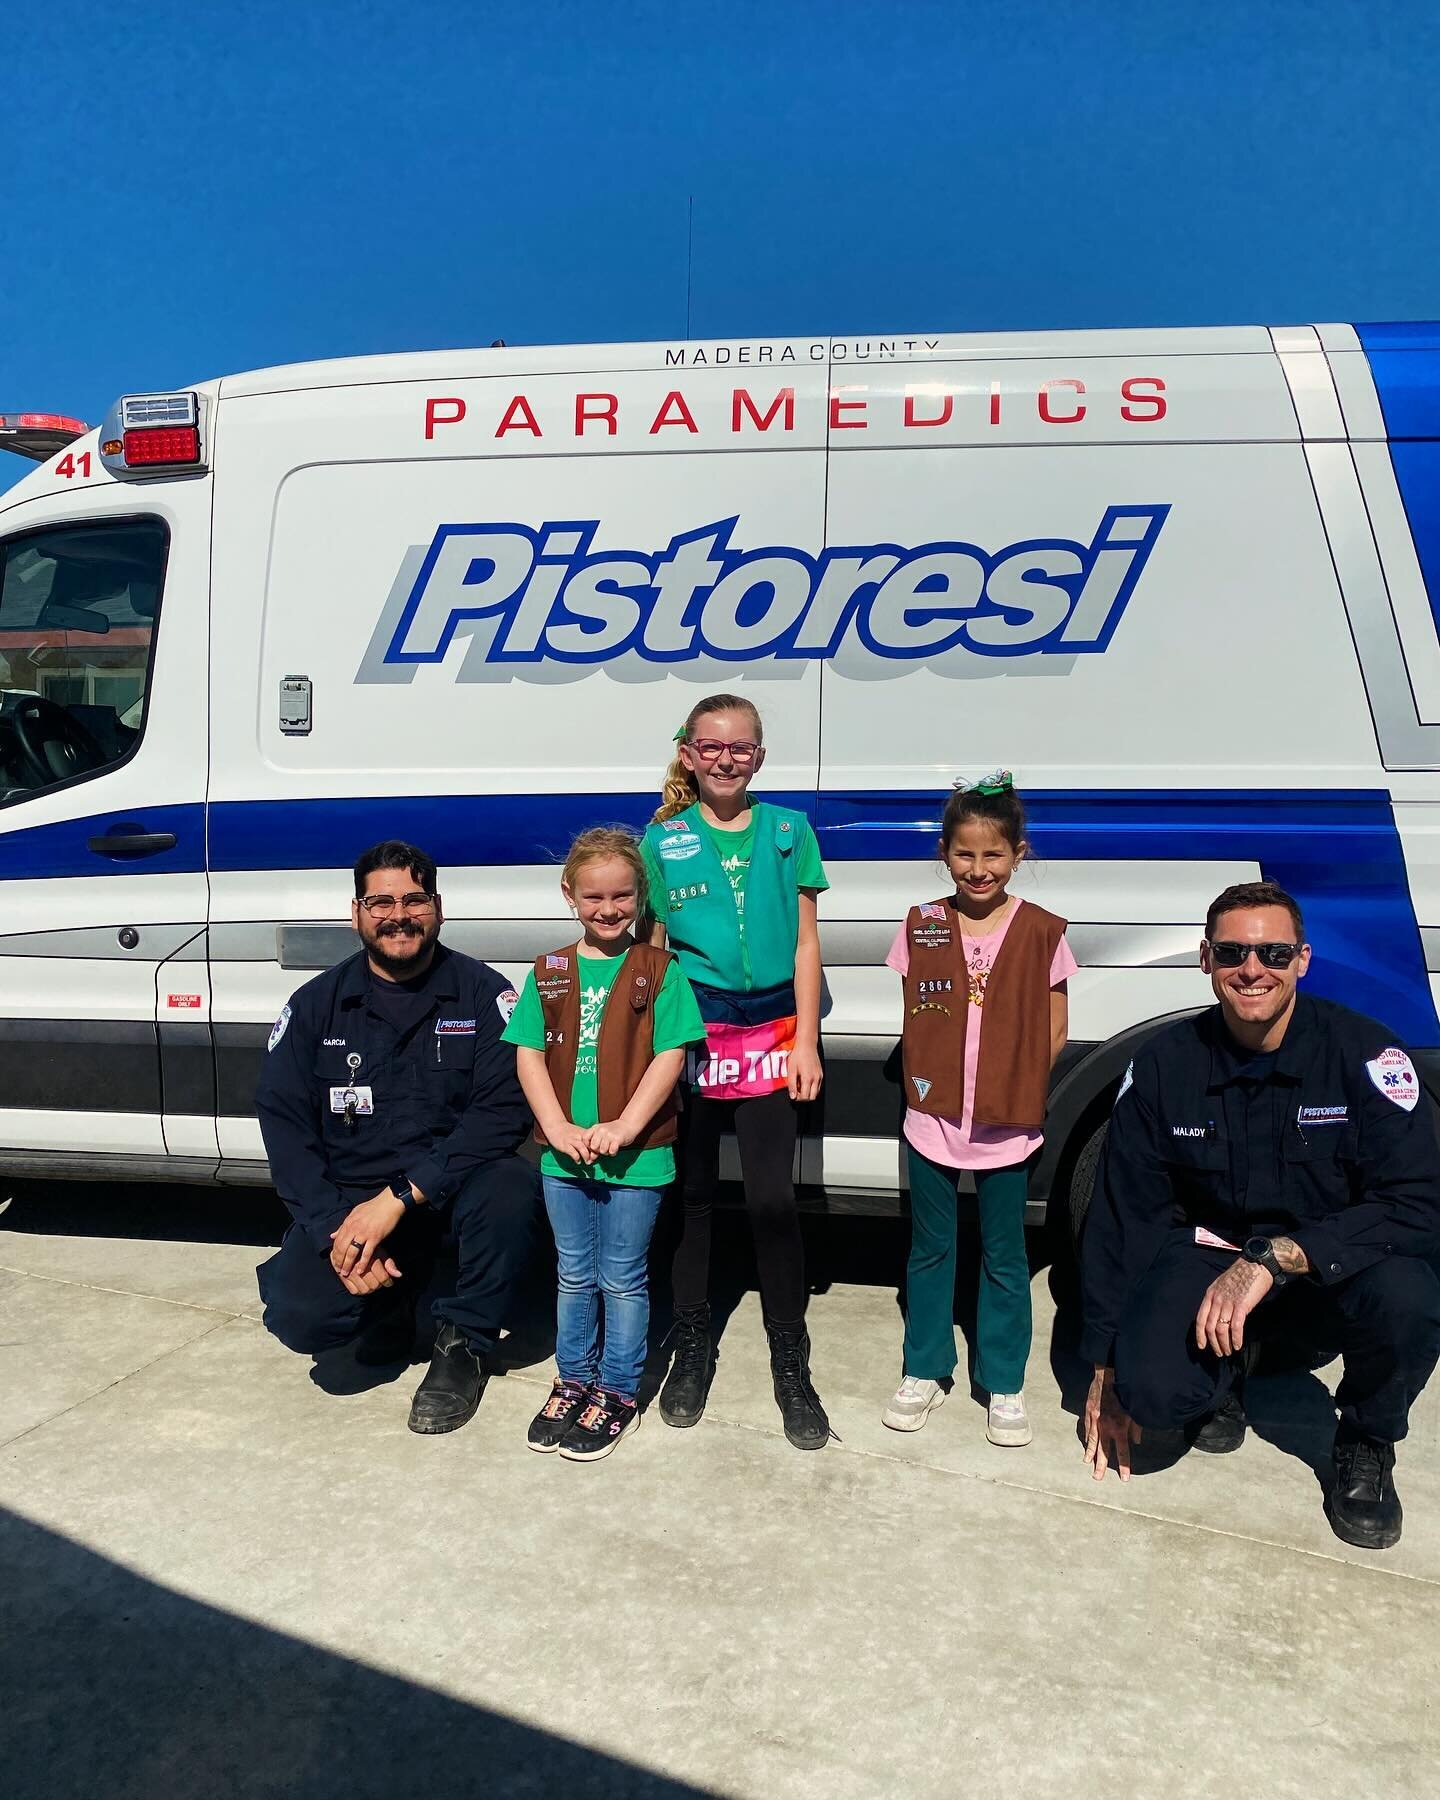 &ldquo;🌟 From young scouts to our seasoned 41 crew, the spirit of service unites us all. A heartwarming moment with the Madera Girl Scouts shows that commitment to making a difference knows no age. Let&rsquo;s inspire and learn from each other, as w